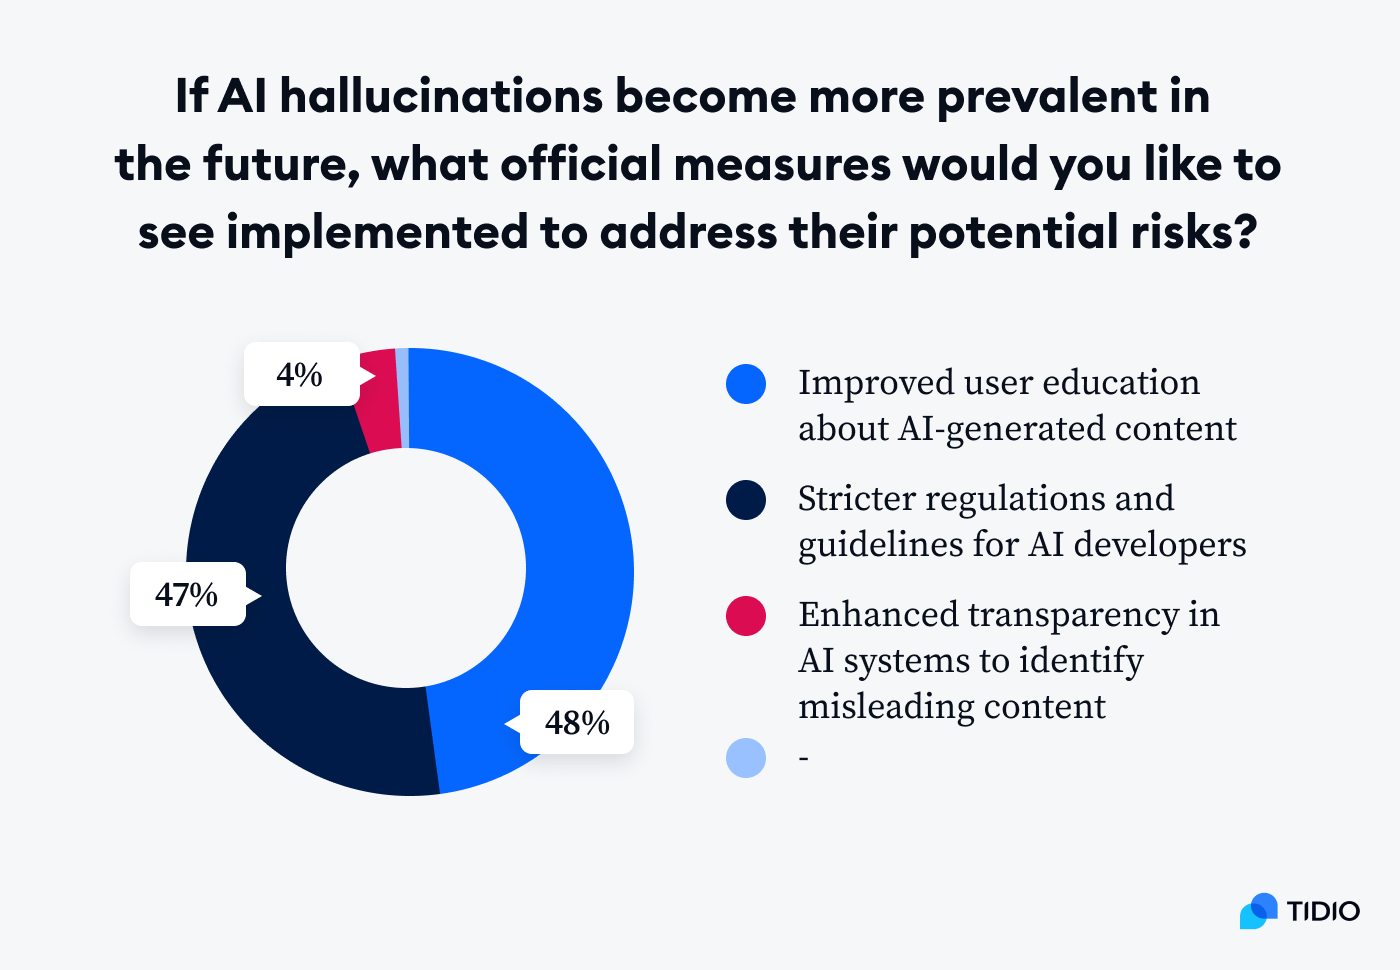 About 47% would vote for stronger regulations and guidelines for developers